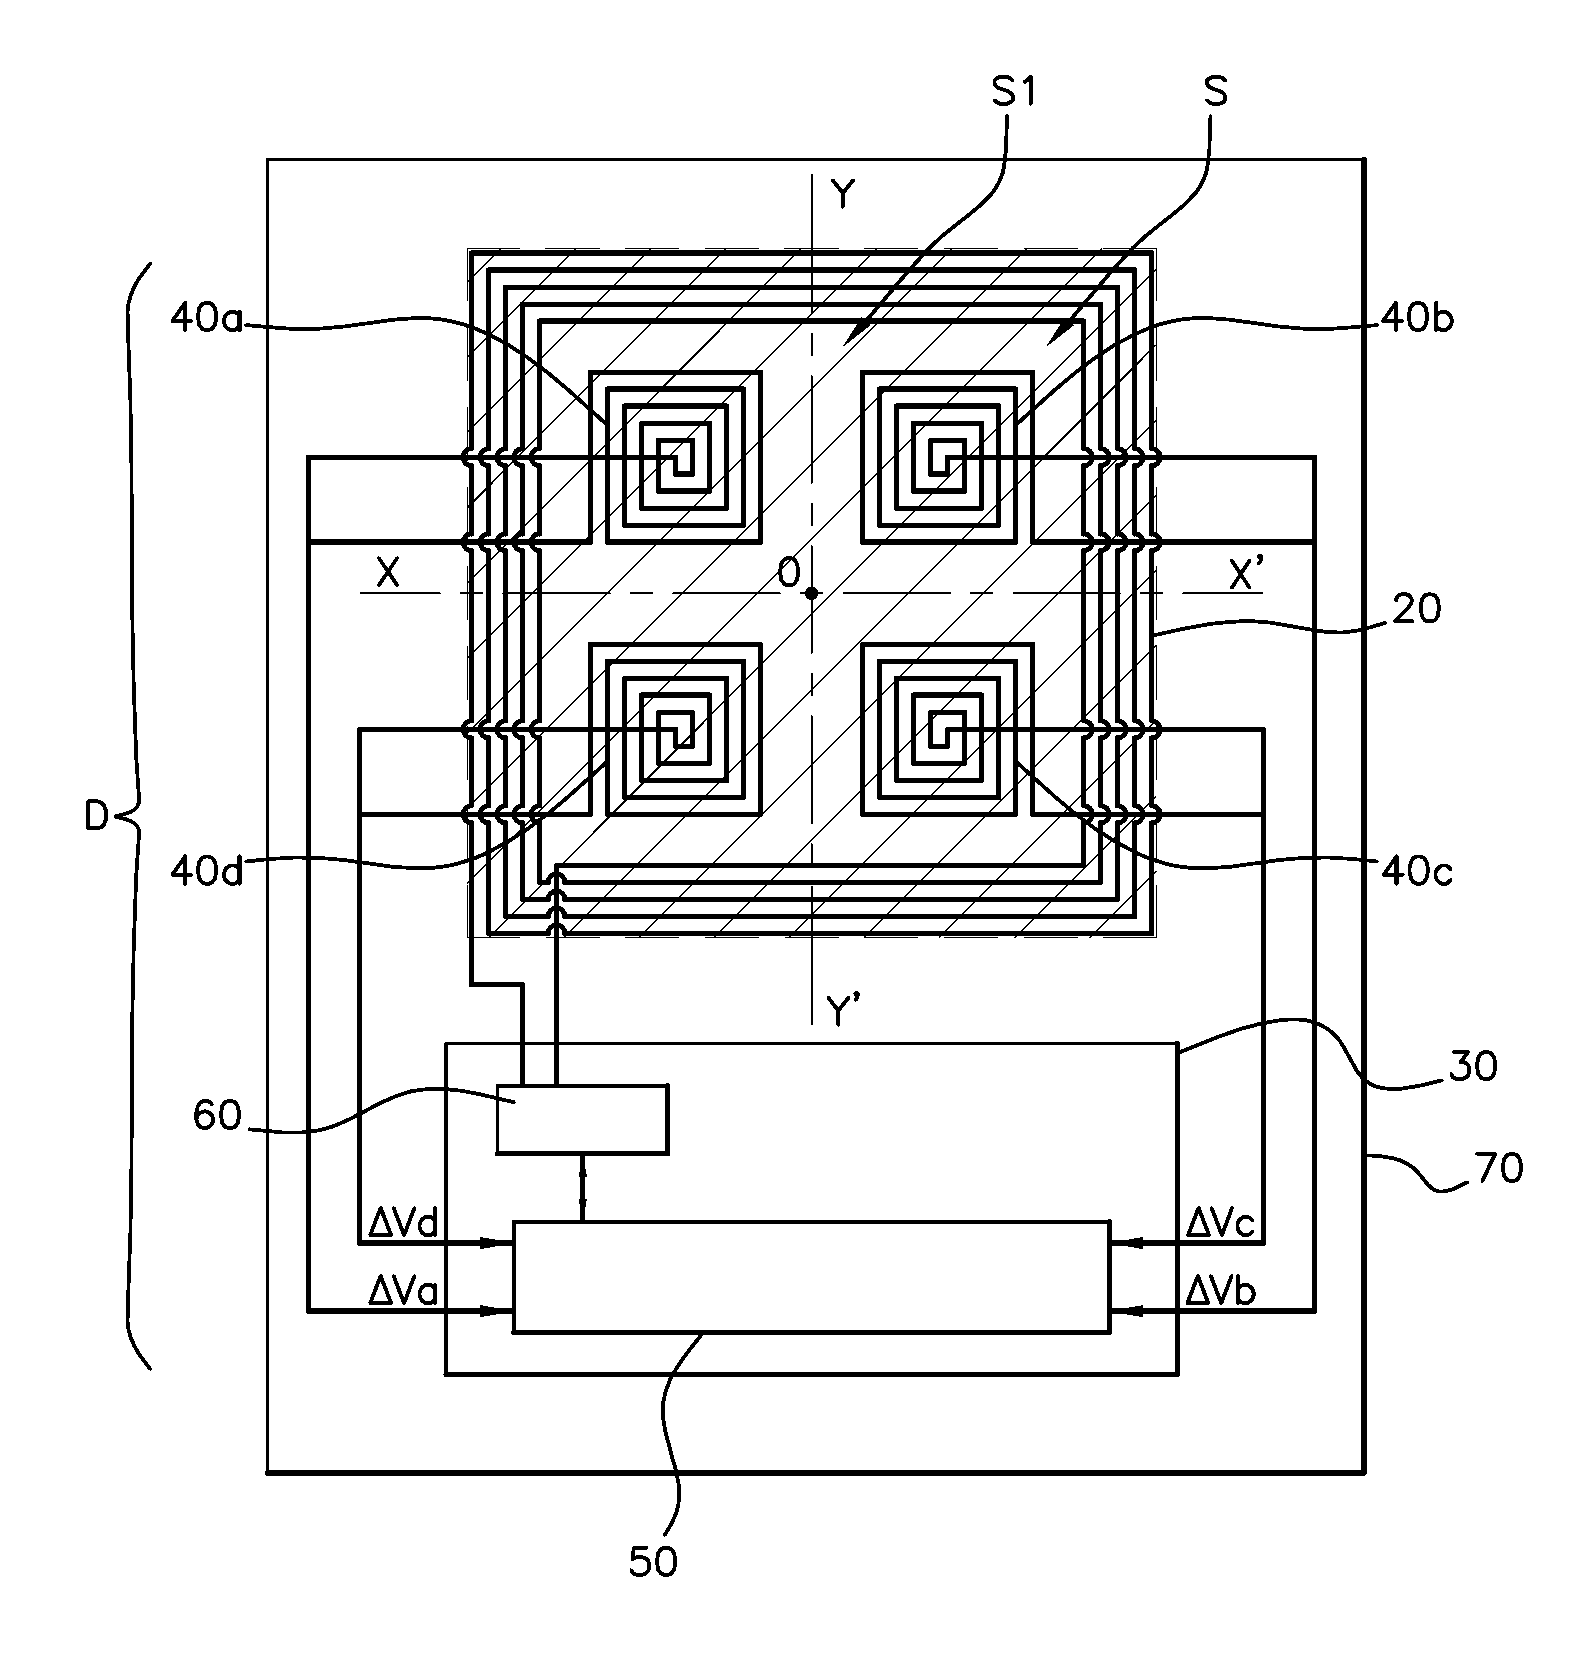 Detection and near-field communication device